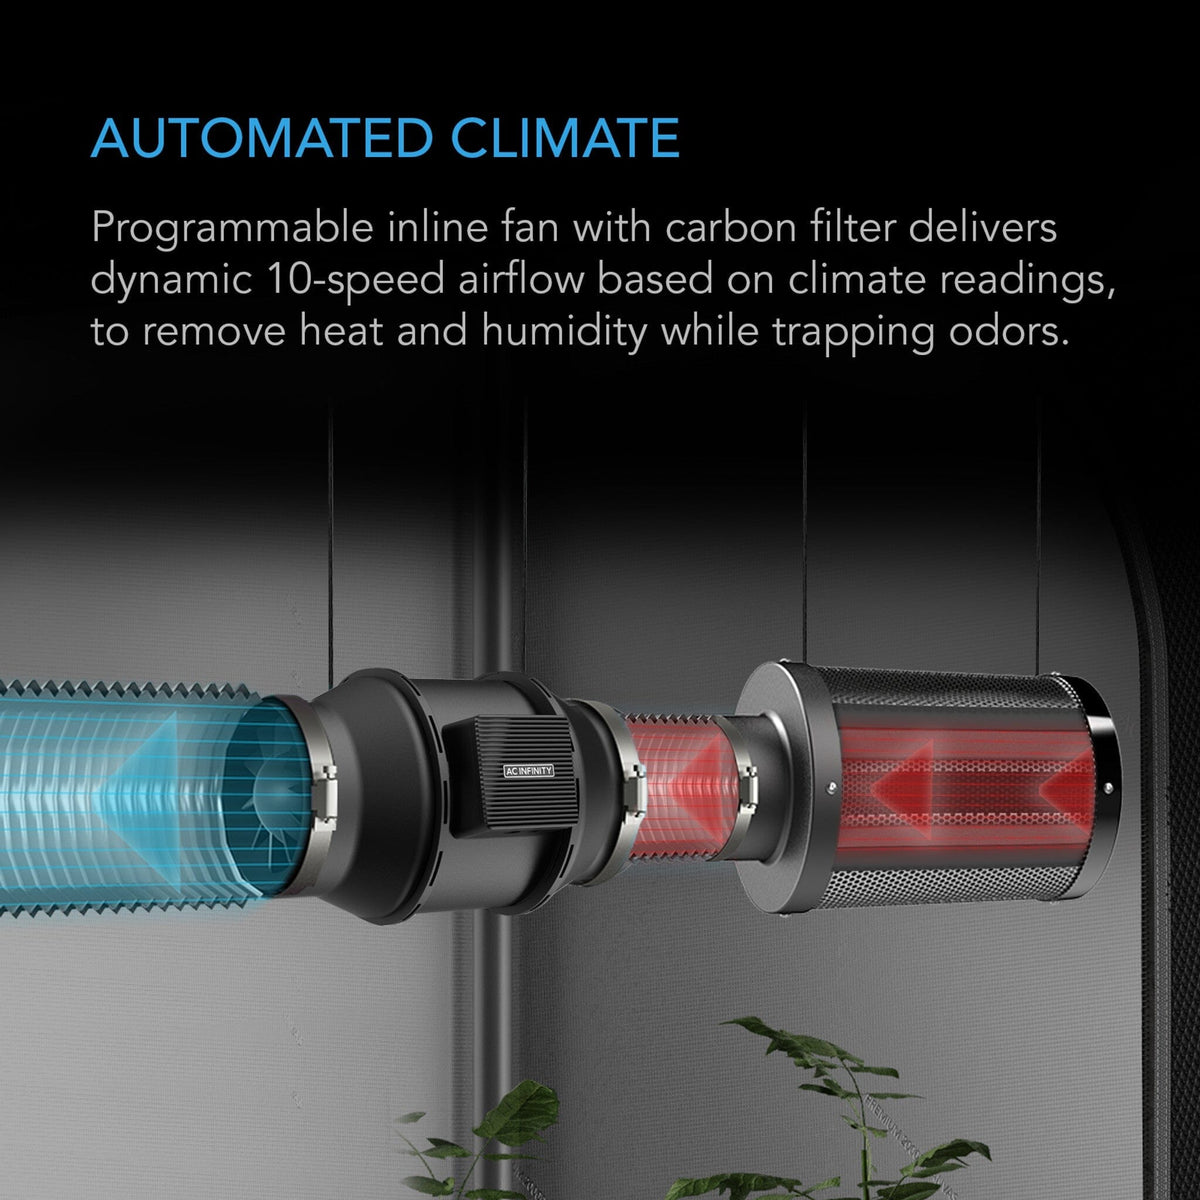 Automated Climate